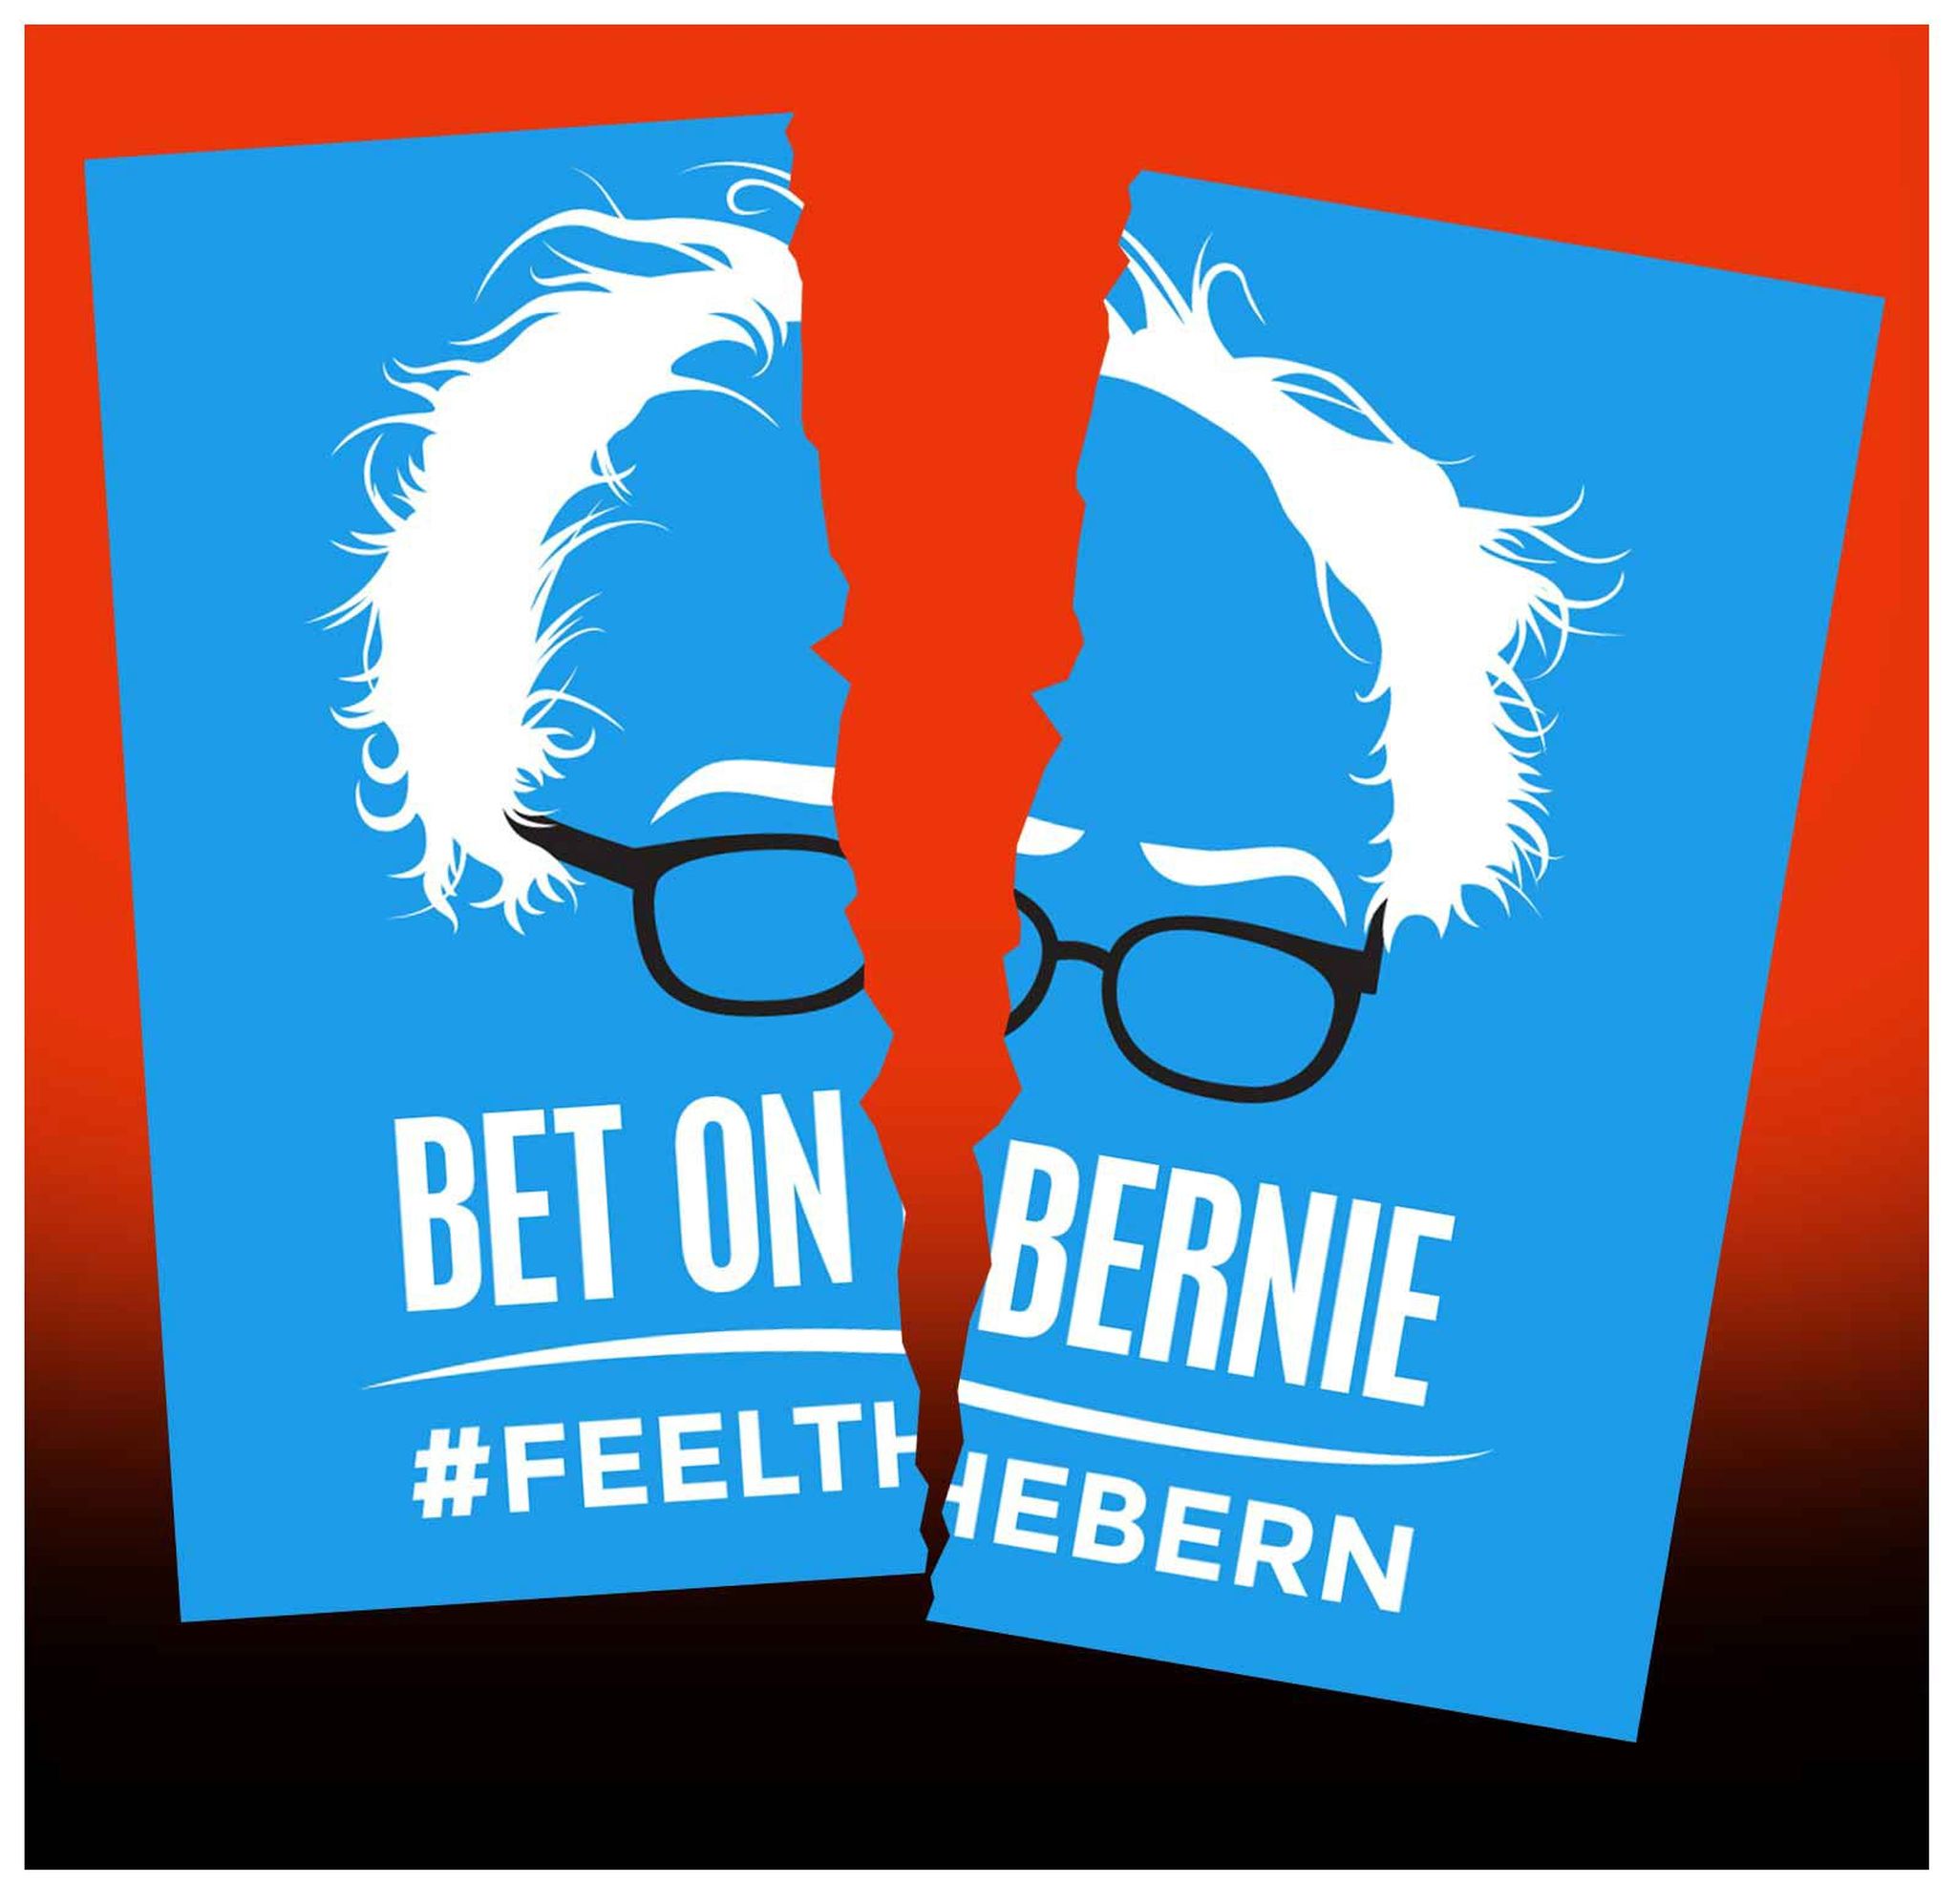 Bet on Bernie poster ripped in half